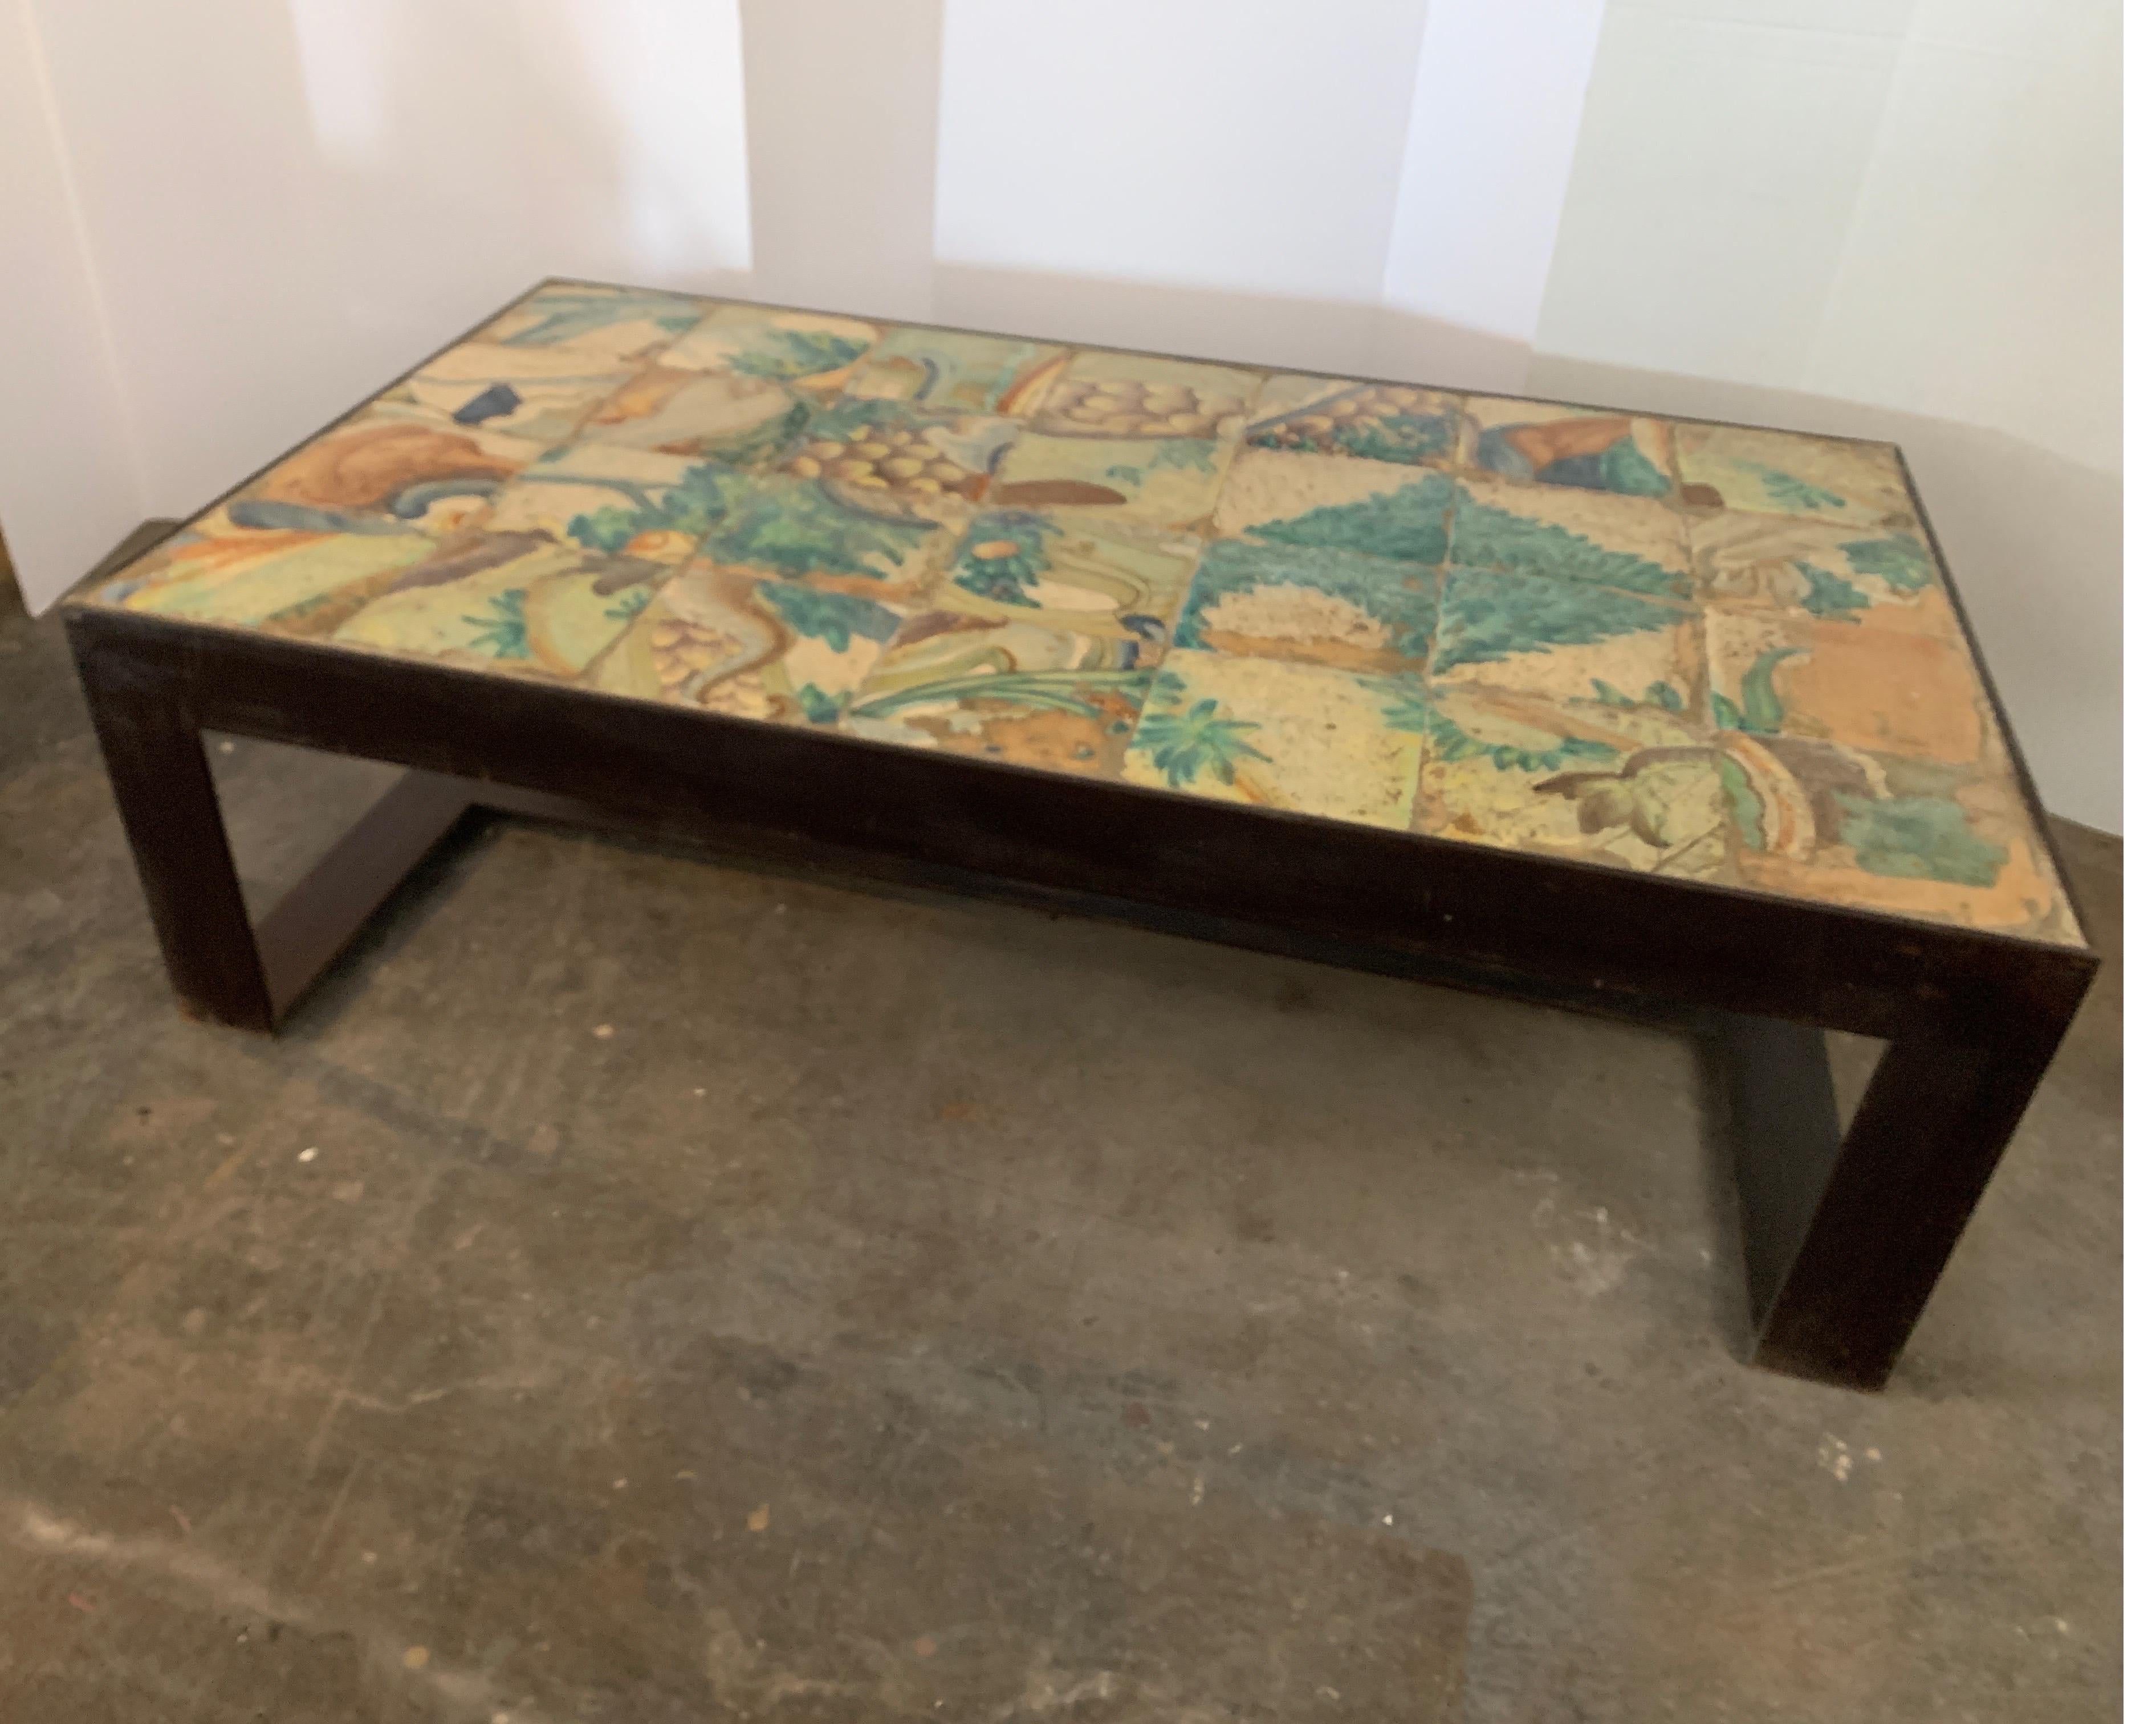 Hand-Crafted Antica Collection Fabrication Iron Table with 17th Century Portuguese Tiles